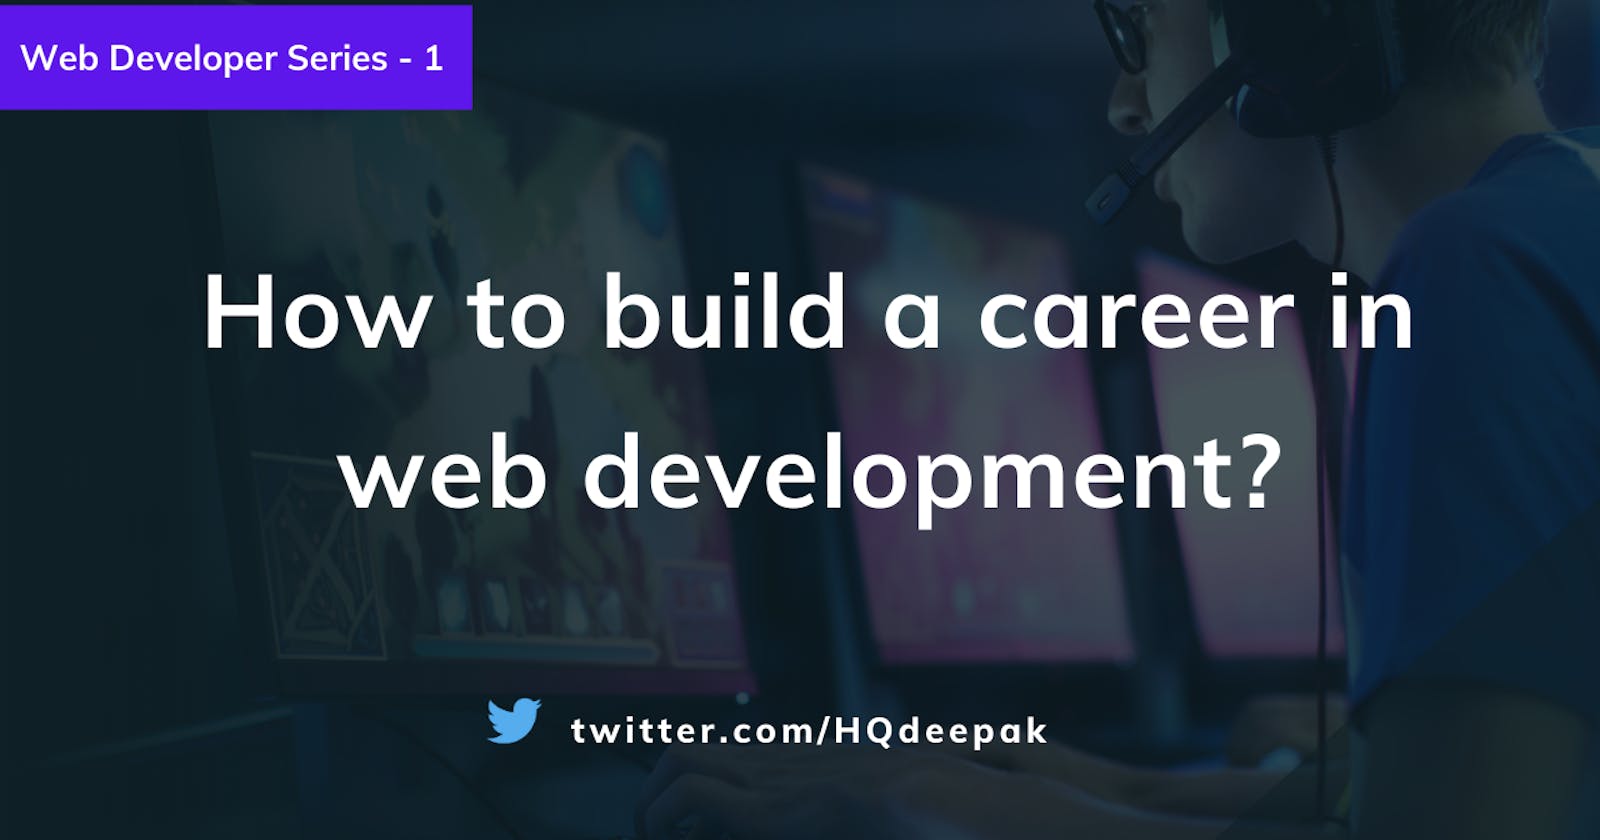 How to build a career in web development?